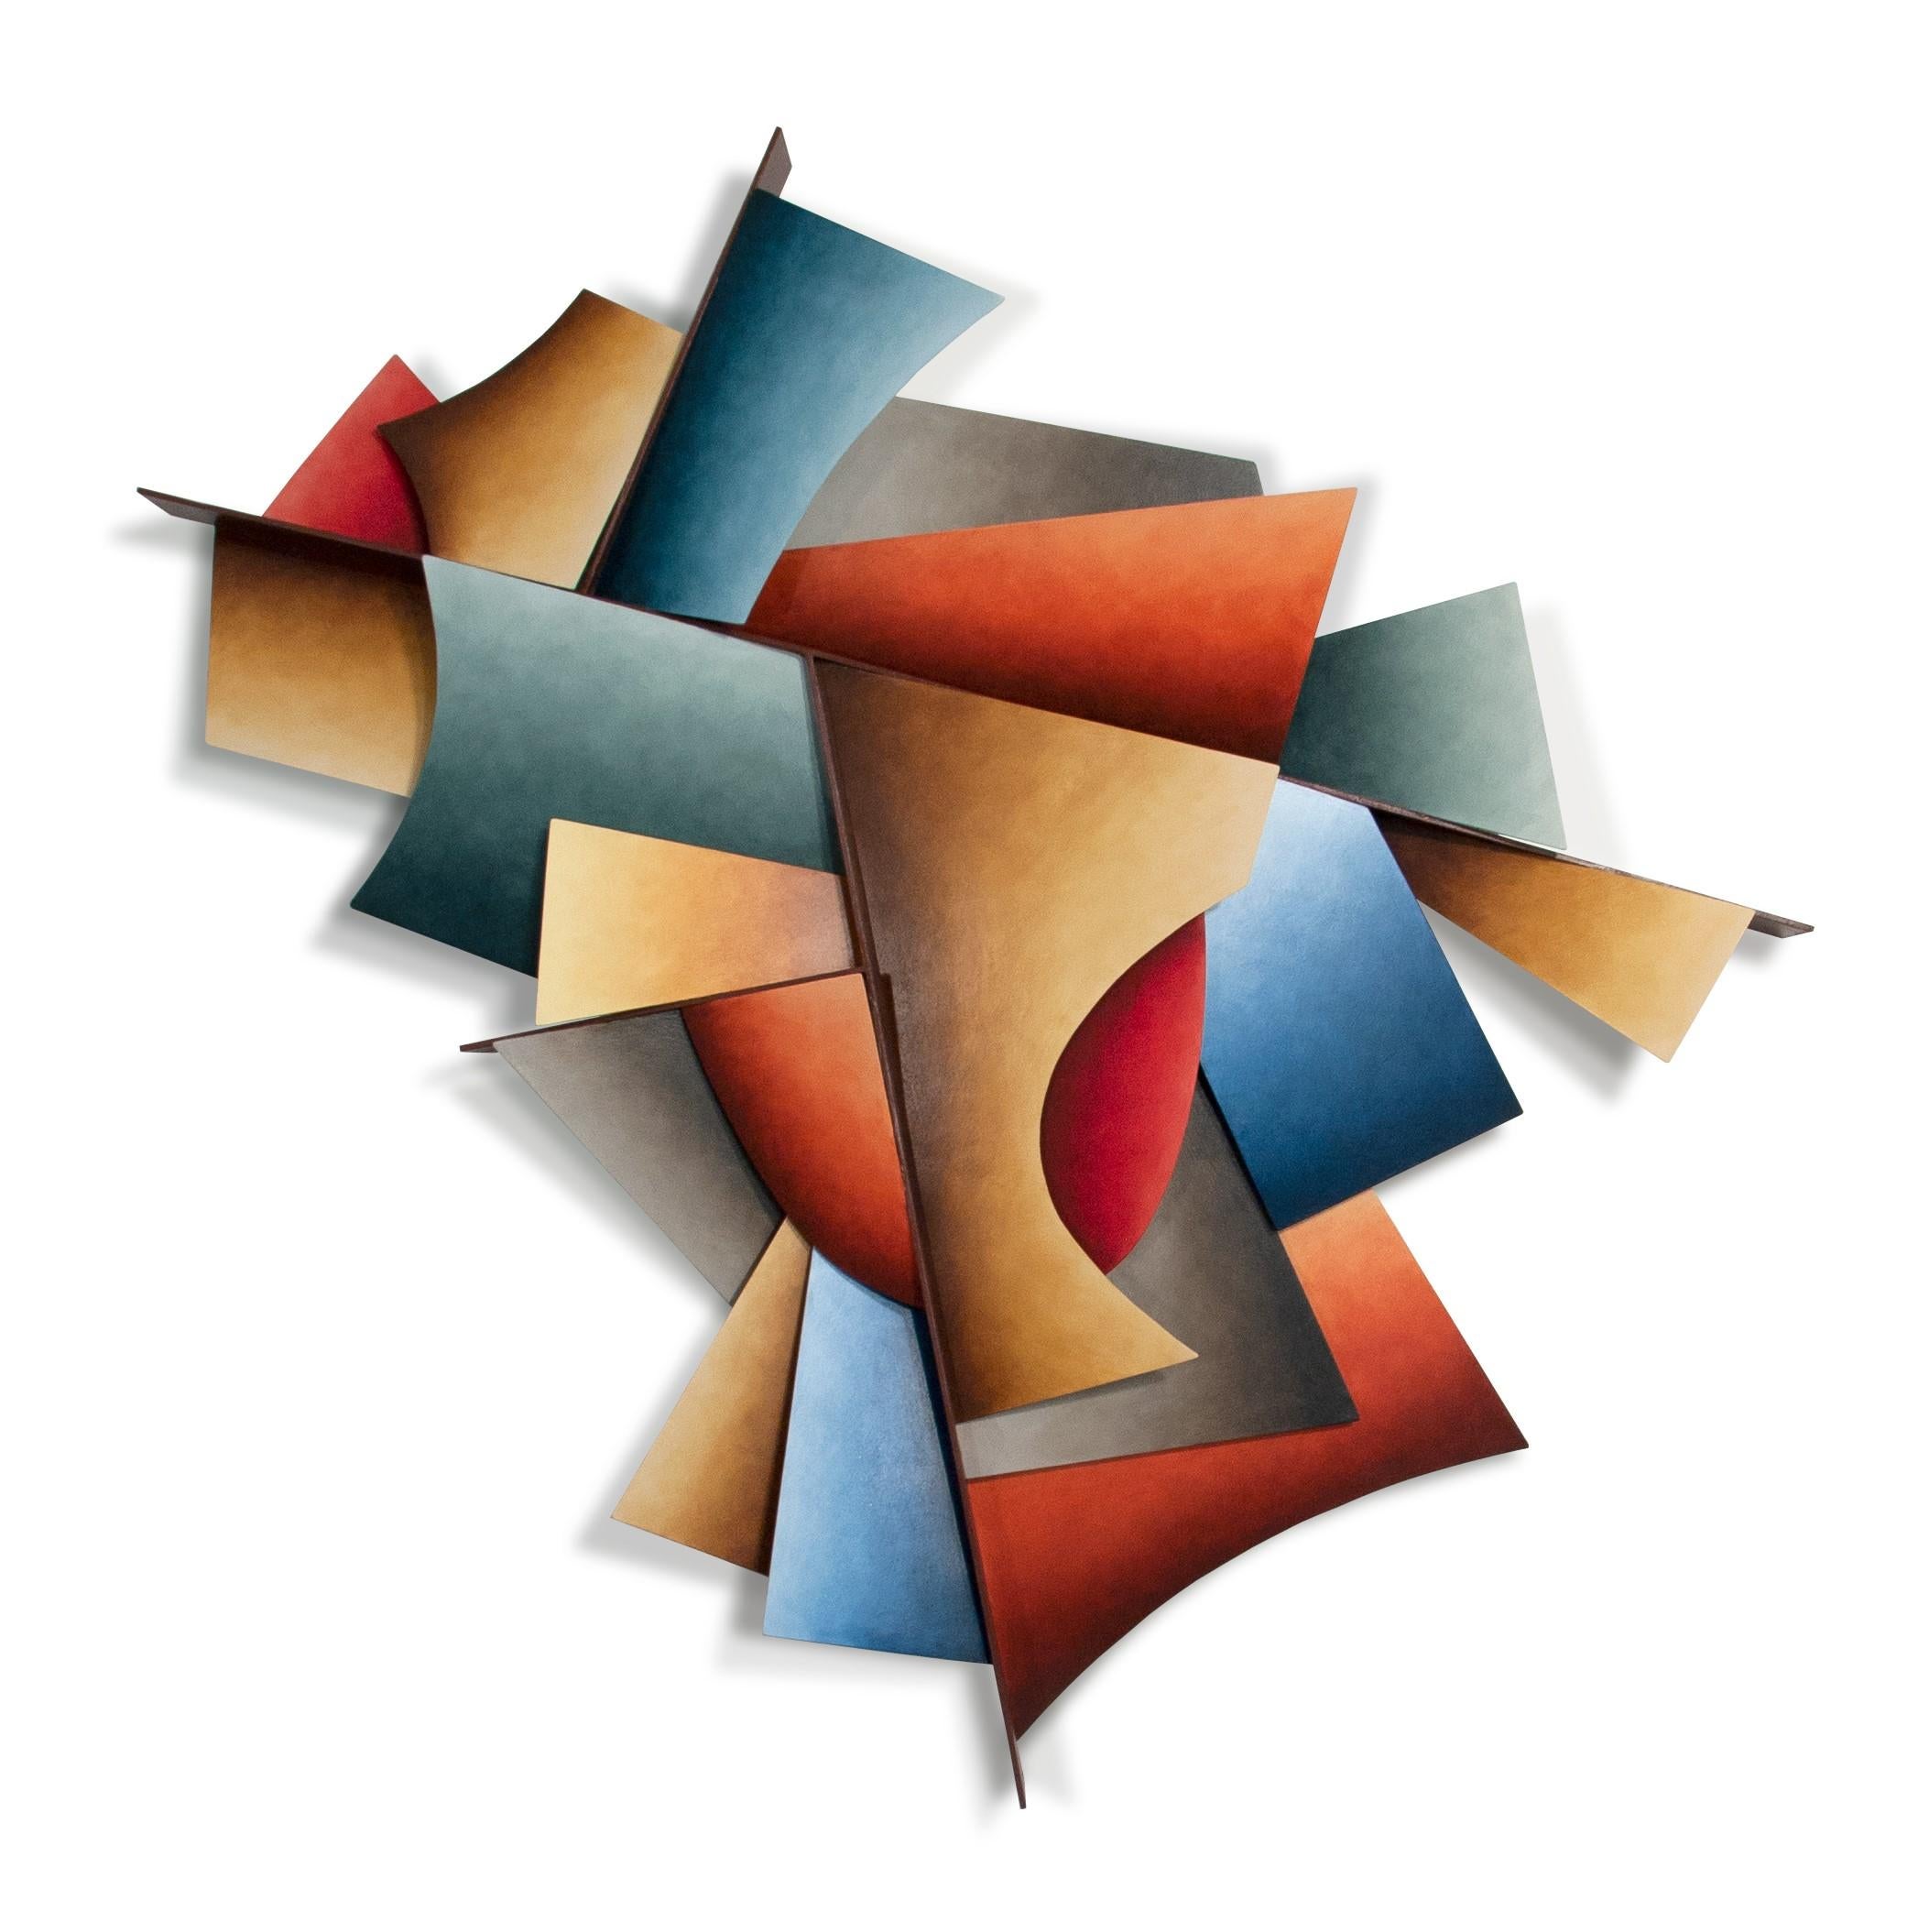 Chris Hill Abstract Sculpture - Memory of Flight - Three Dimensional Steel Wall Sculpture, Linear Geometric Form